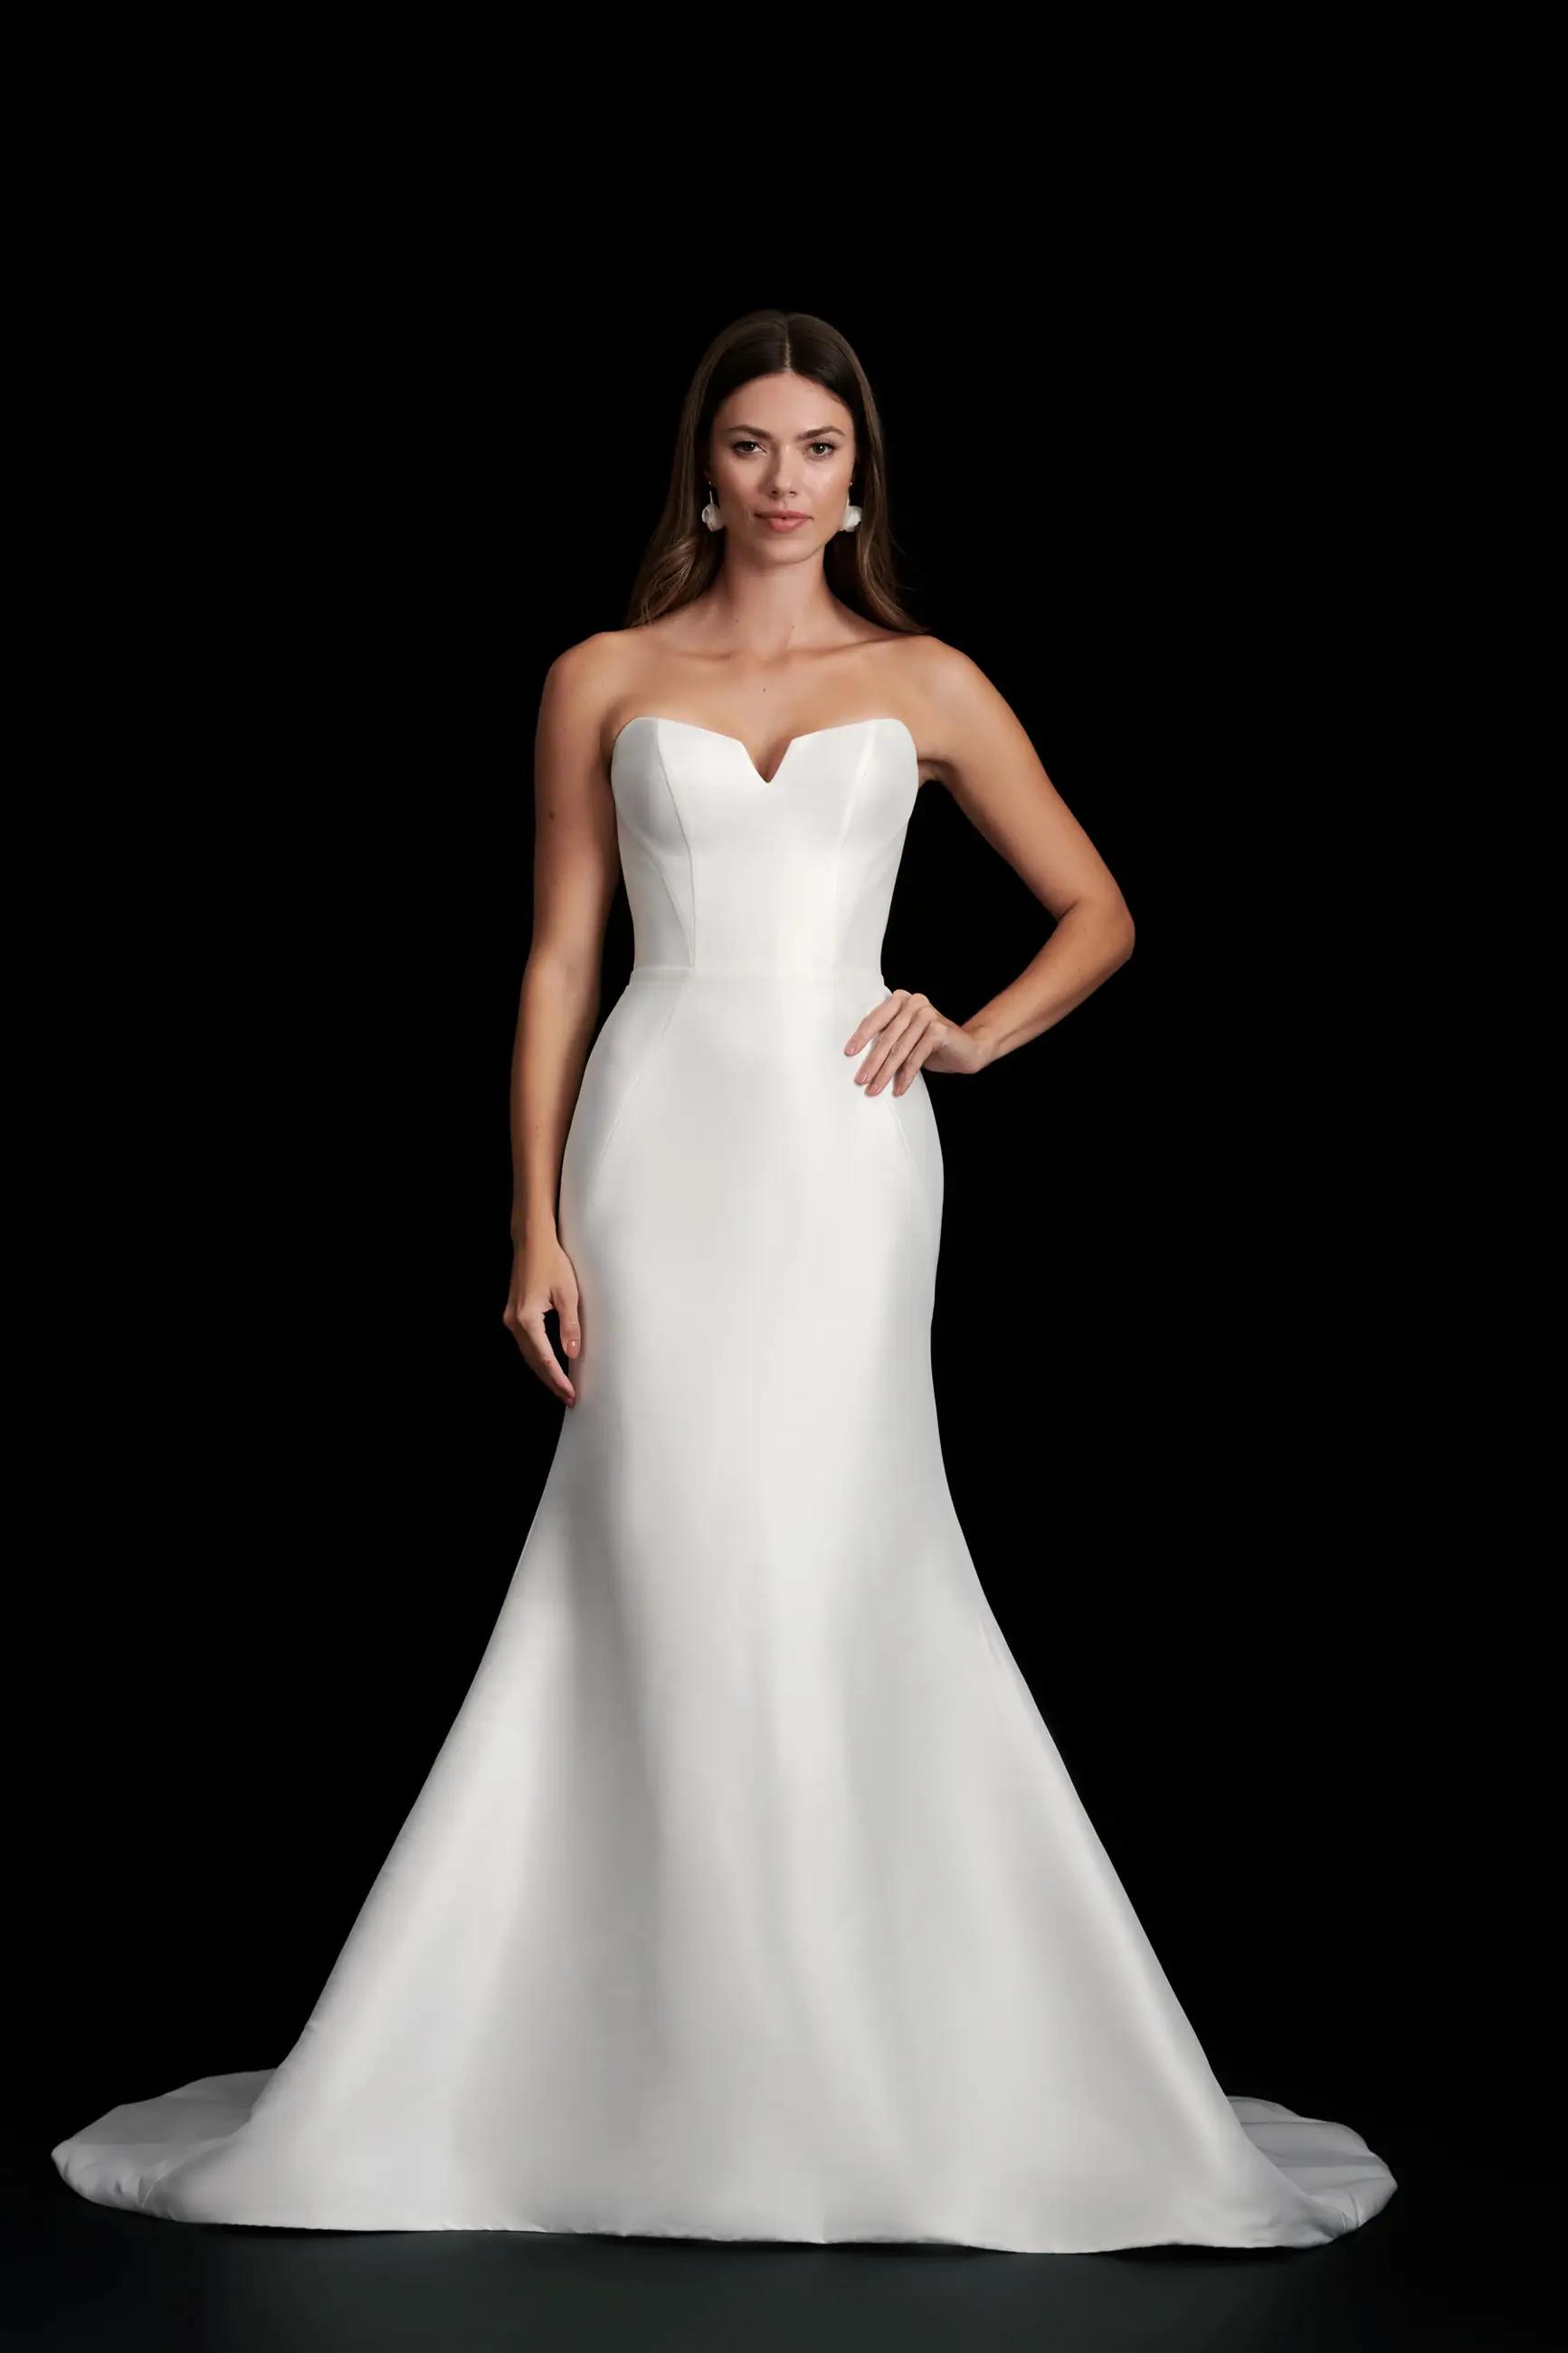 Margaret wedding dress with notch neckline strapless bodice and fit to flare skirt in stretch mikado